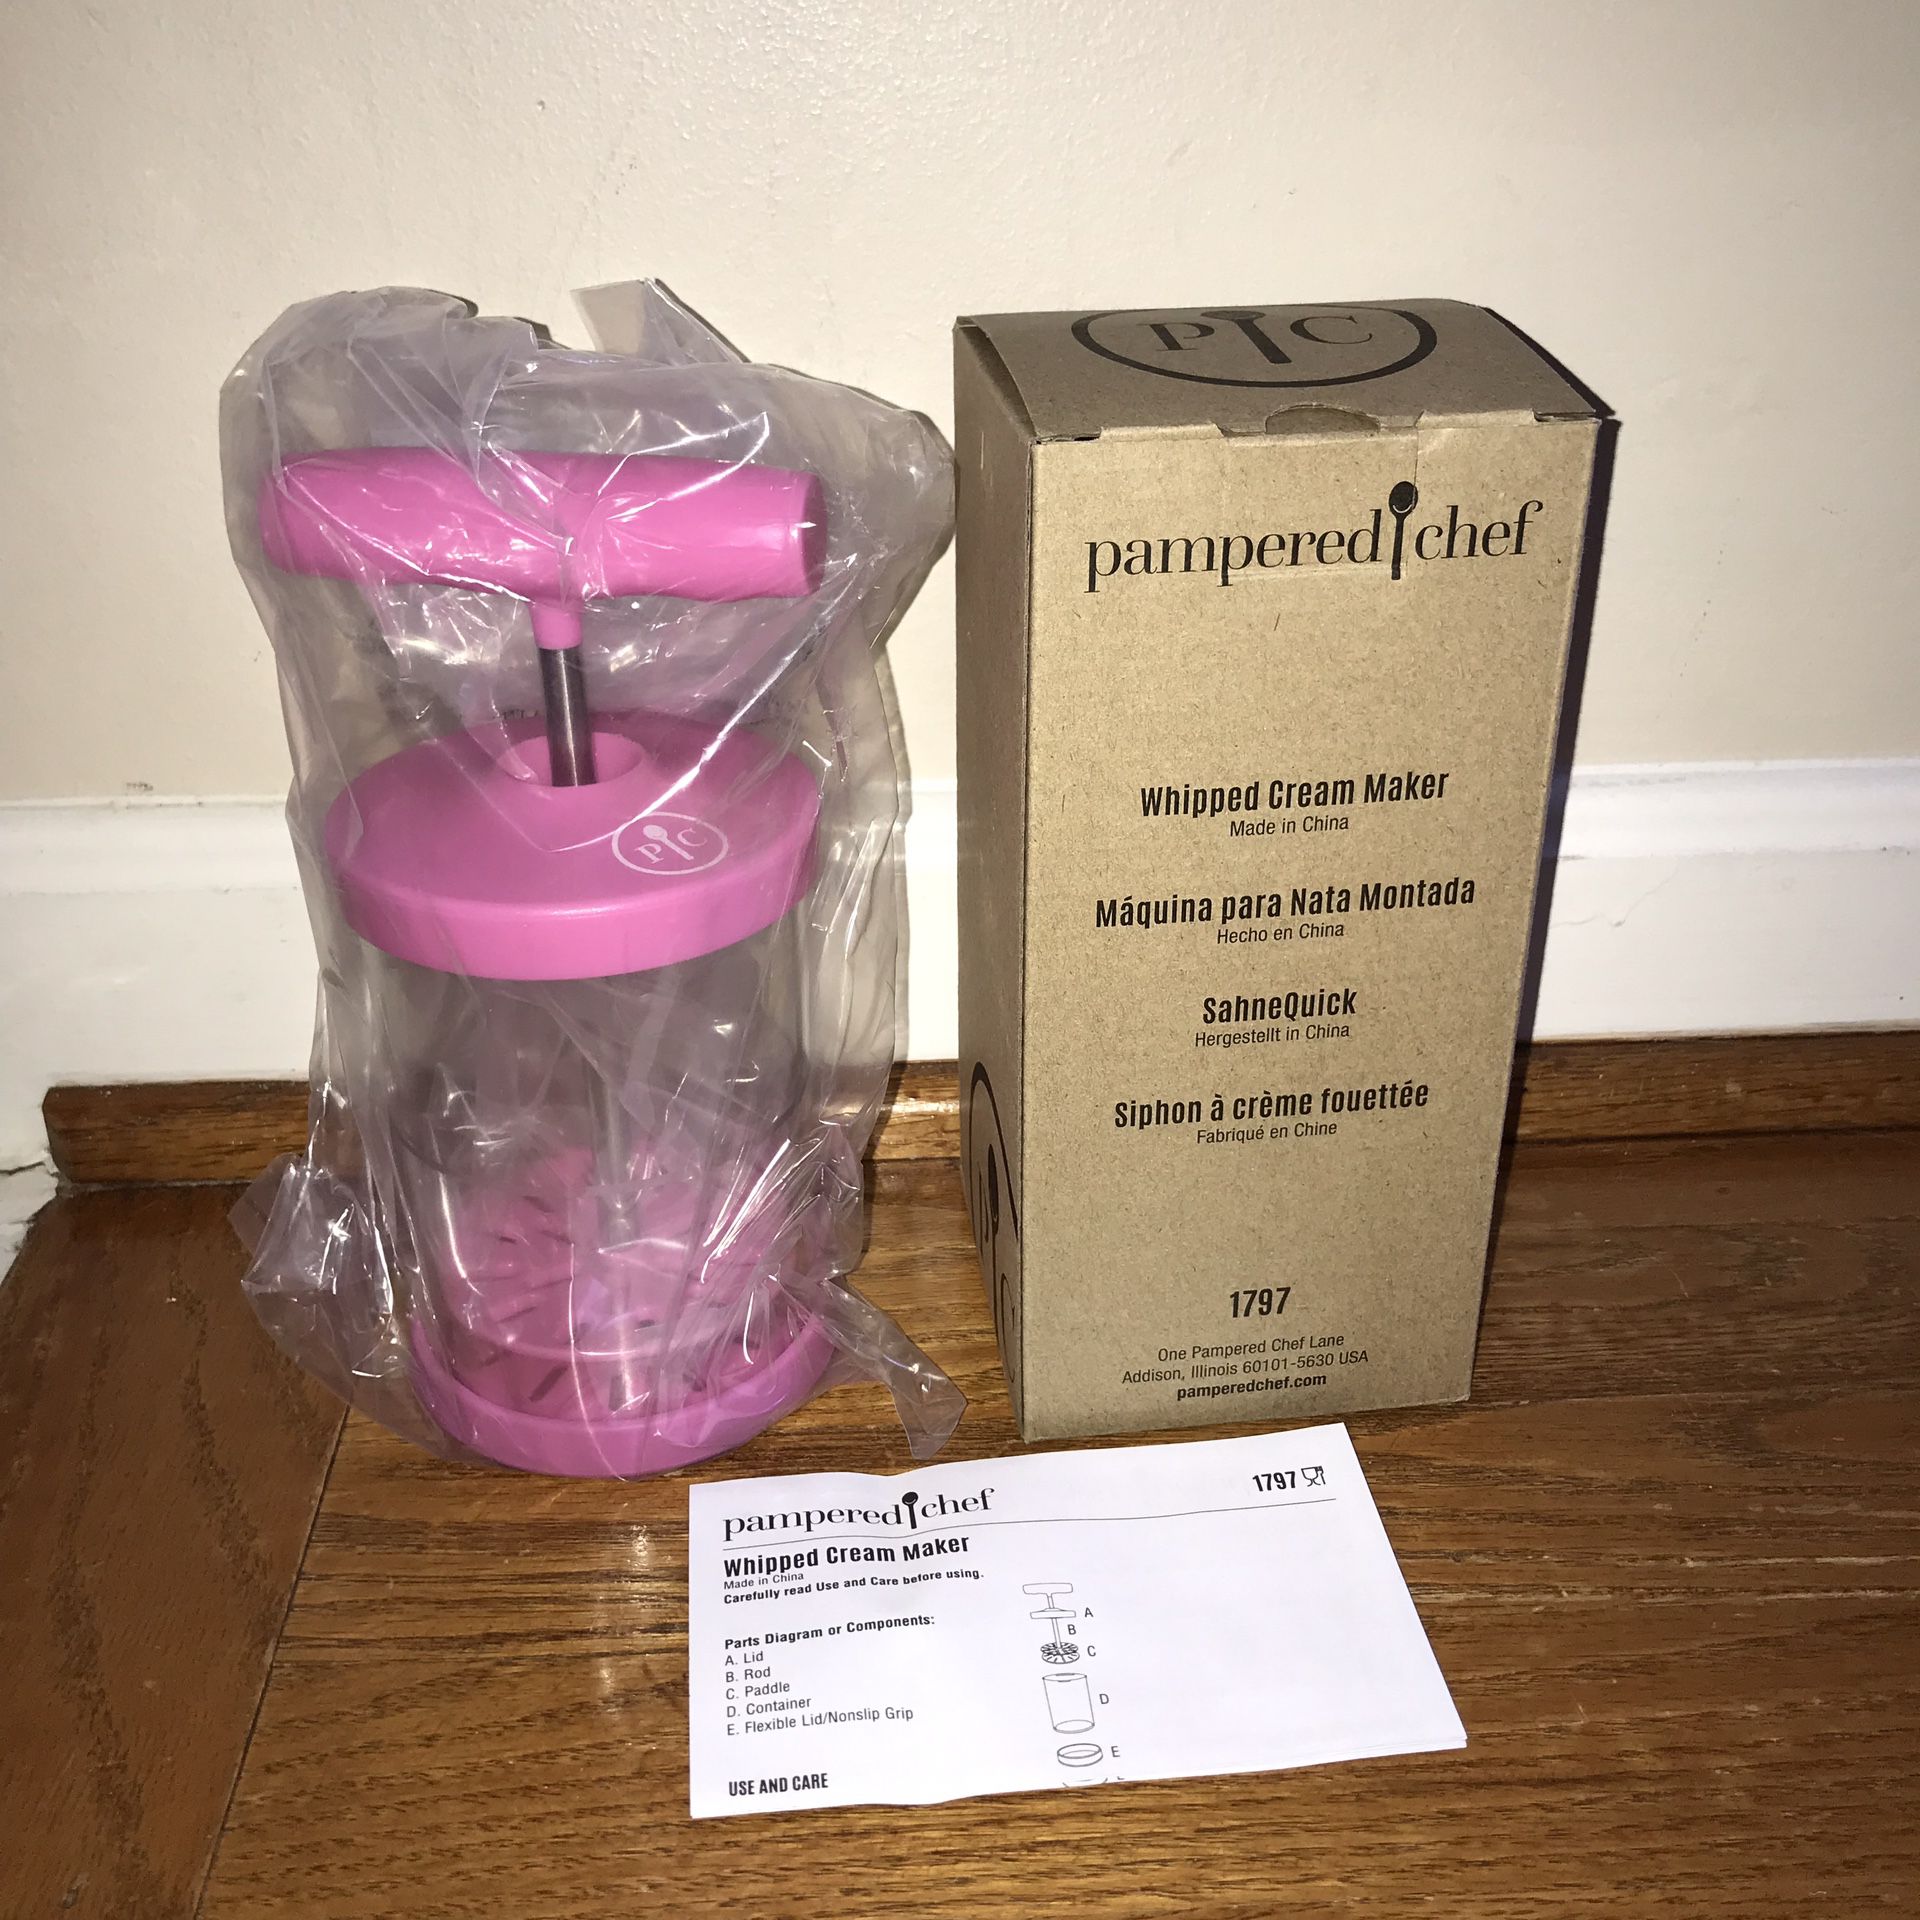 The Pink Pampered Chef